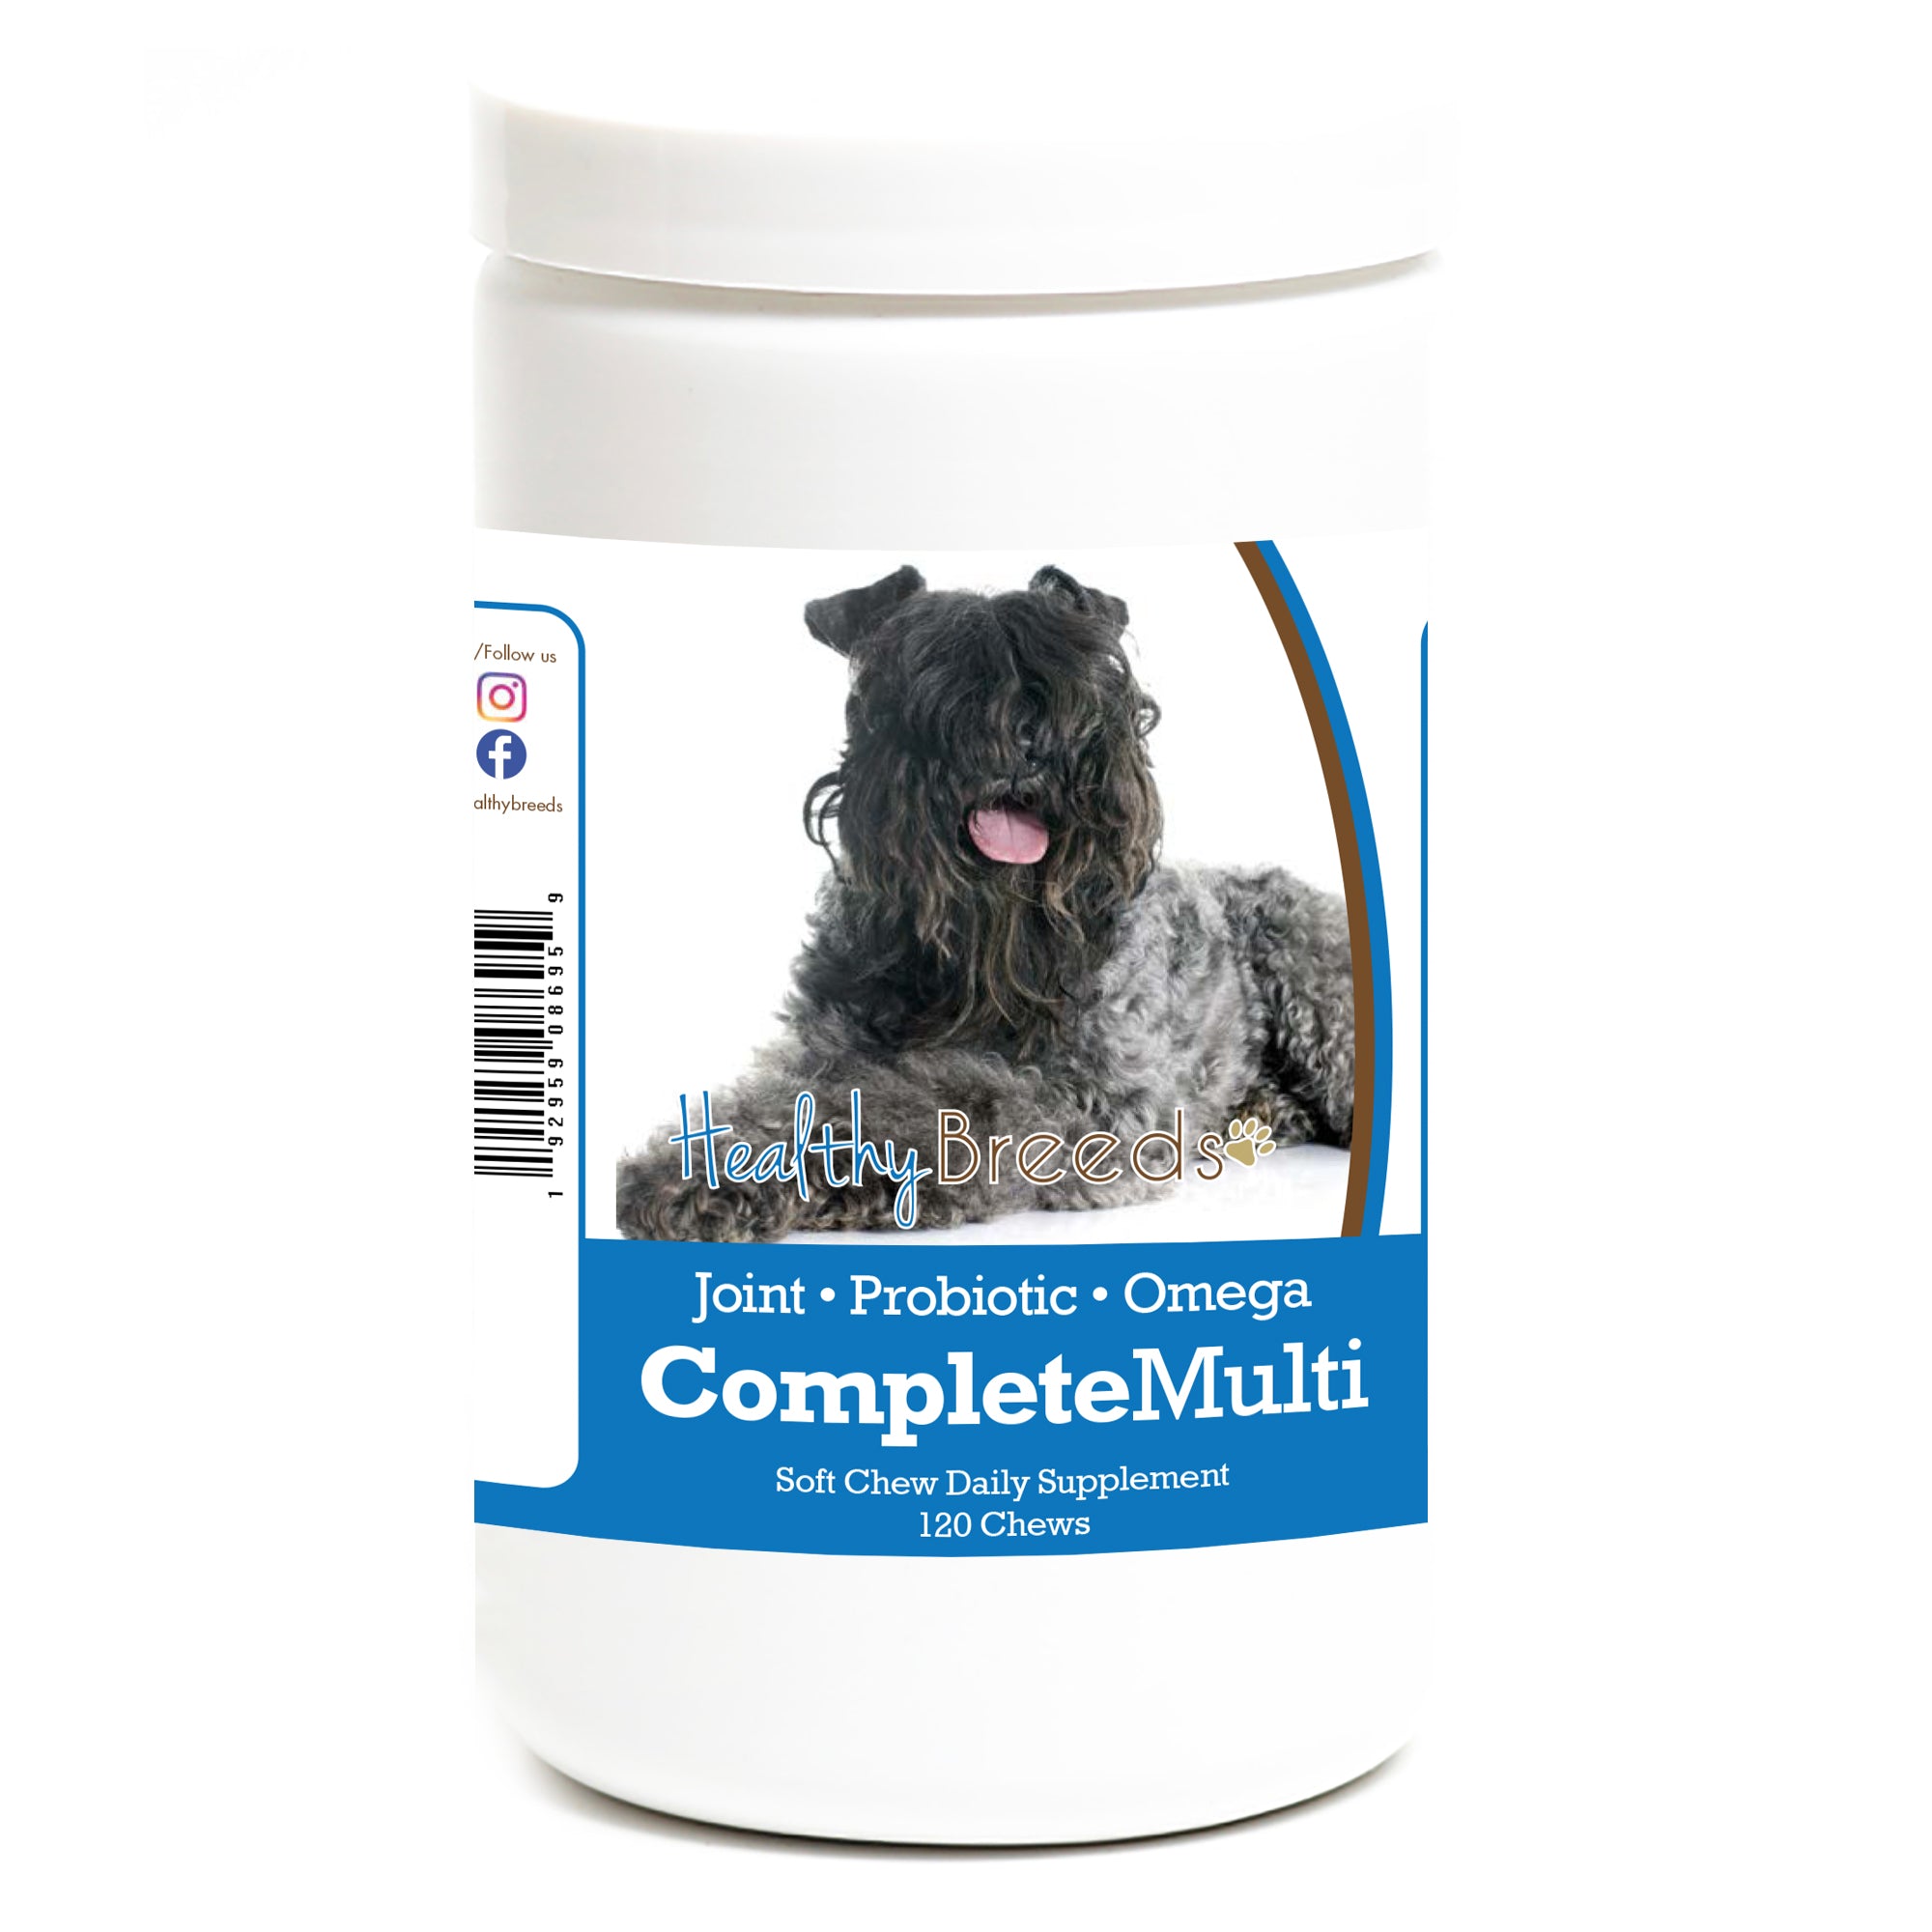 Kerry Blue Terrier All In One Multivitamin Soft Chew 120 Count